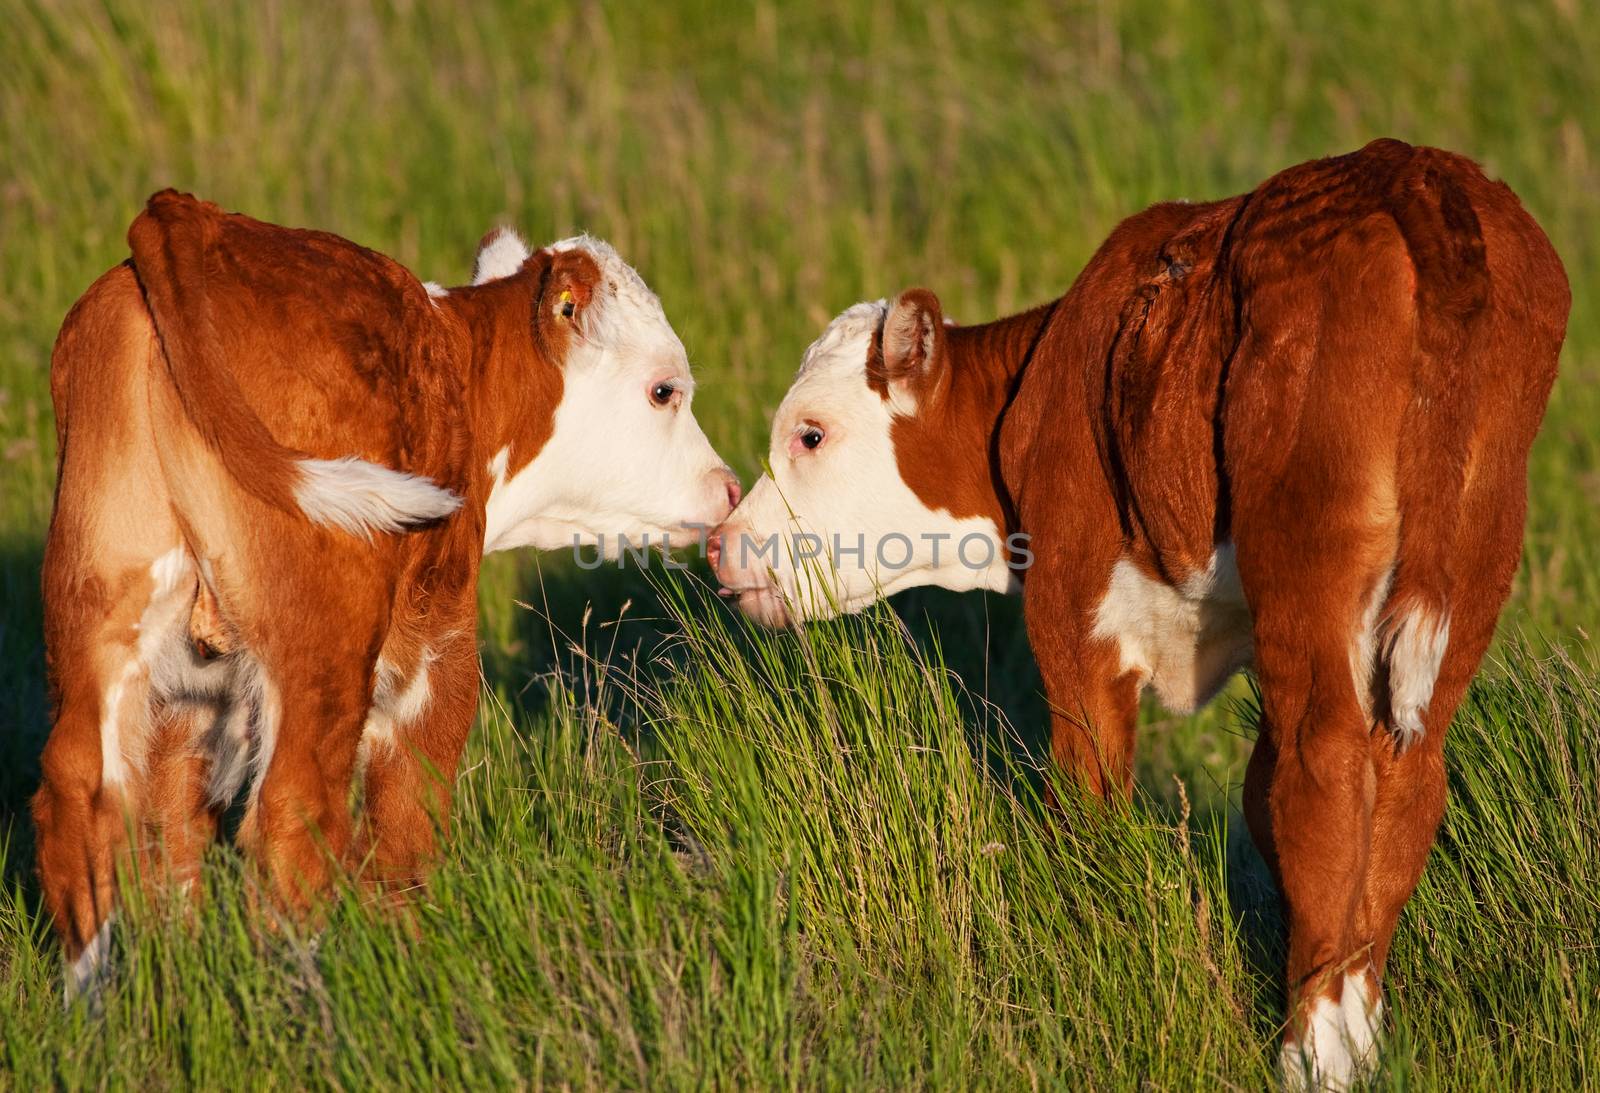 Two baby calves touch noses and lick each other affectionately.  Shot in early evening light (golden hour).